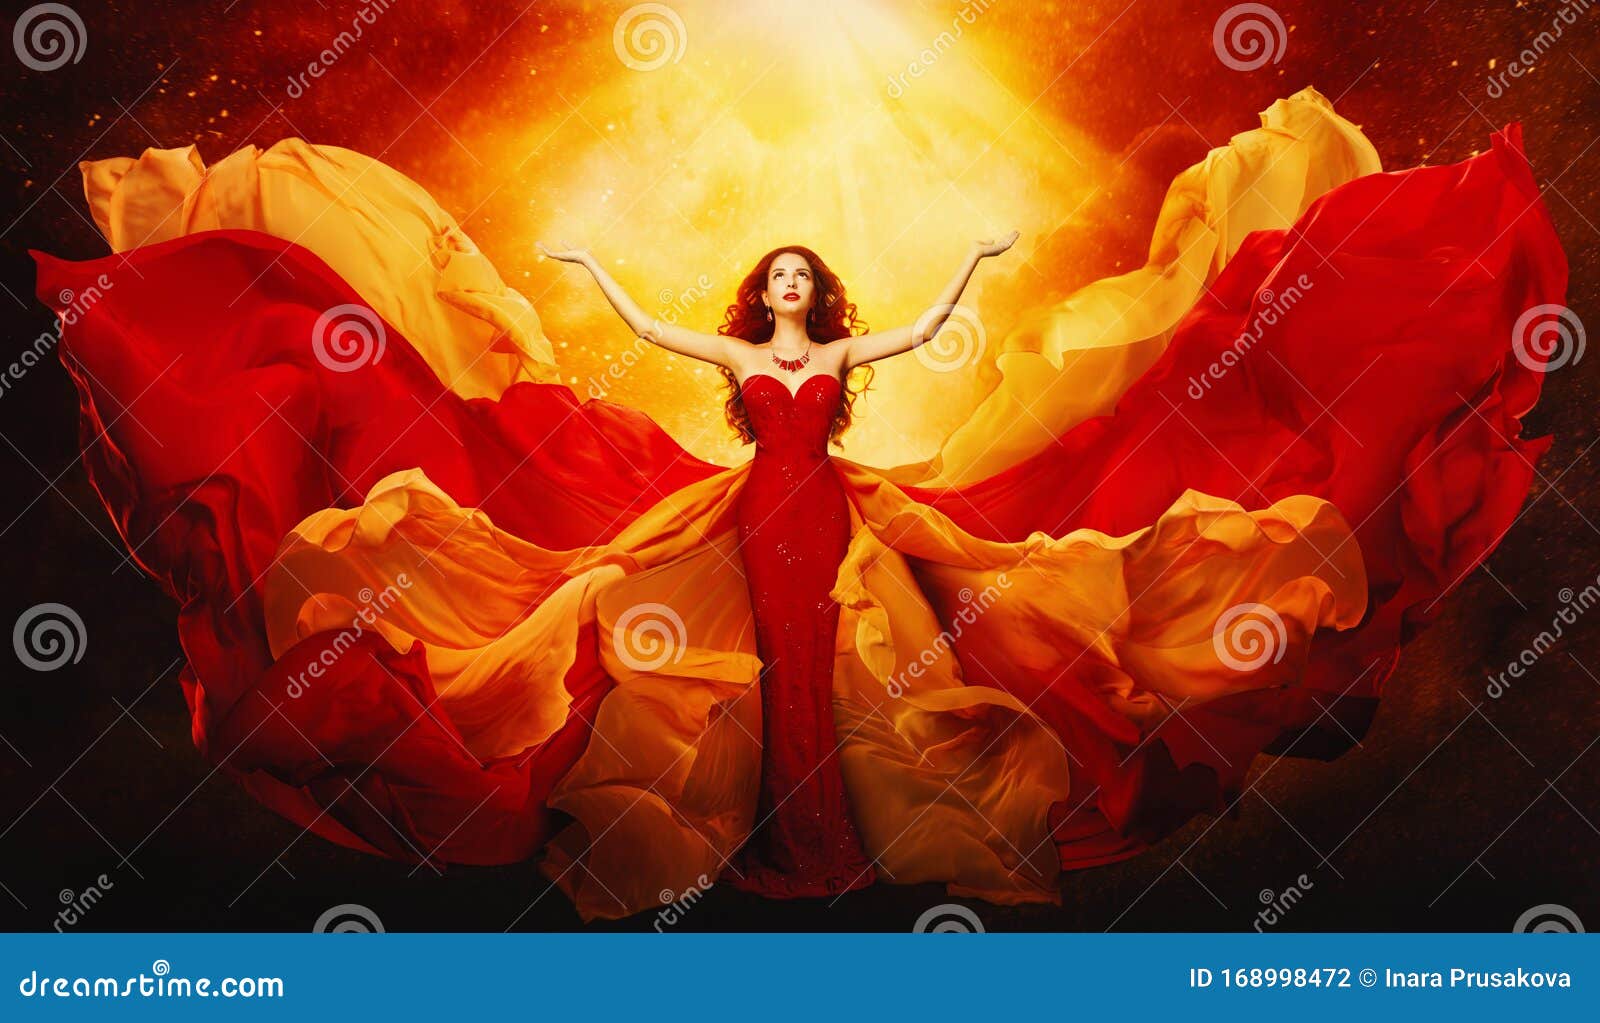 woman in flying dress raised arms to mystery light, girl in red gown